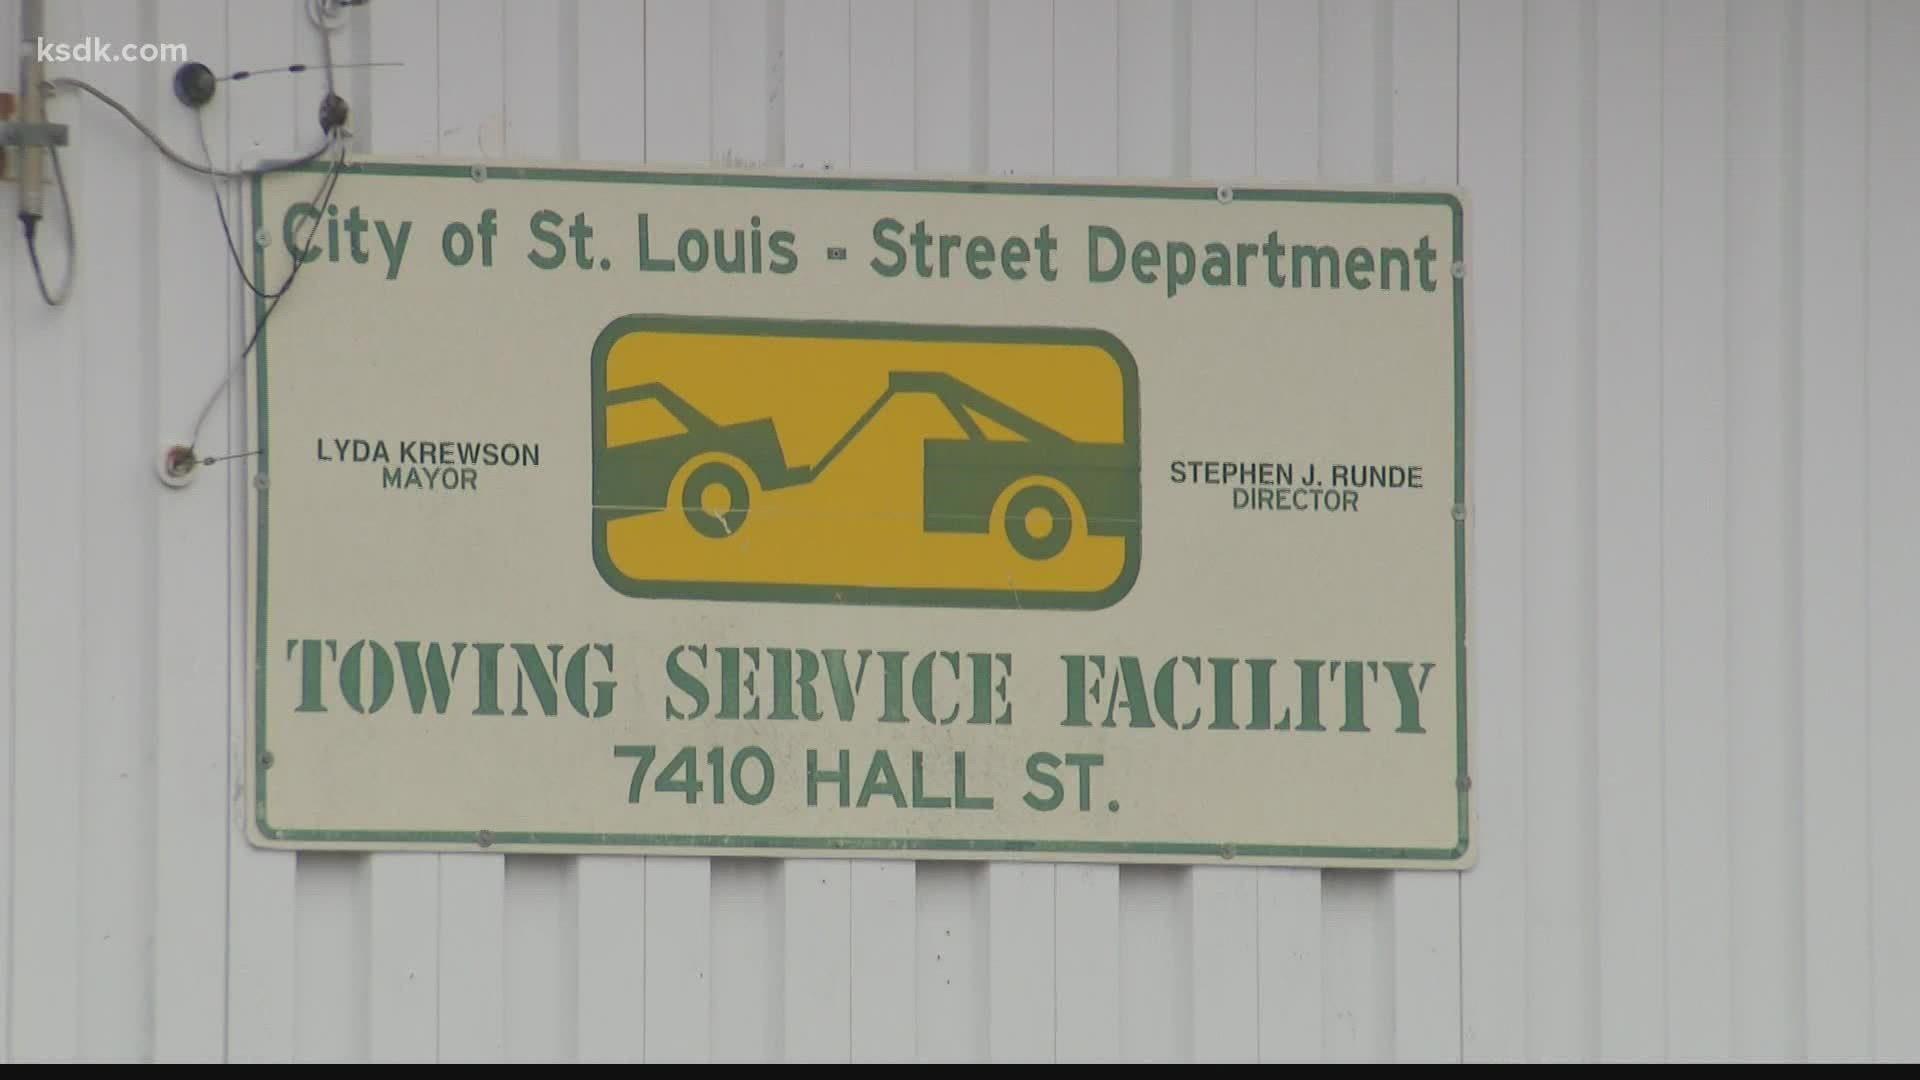 One member of the committee suggested that criminal charges may be coming for the people involved in alleged mismanagement of the city tow lot.